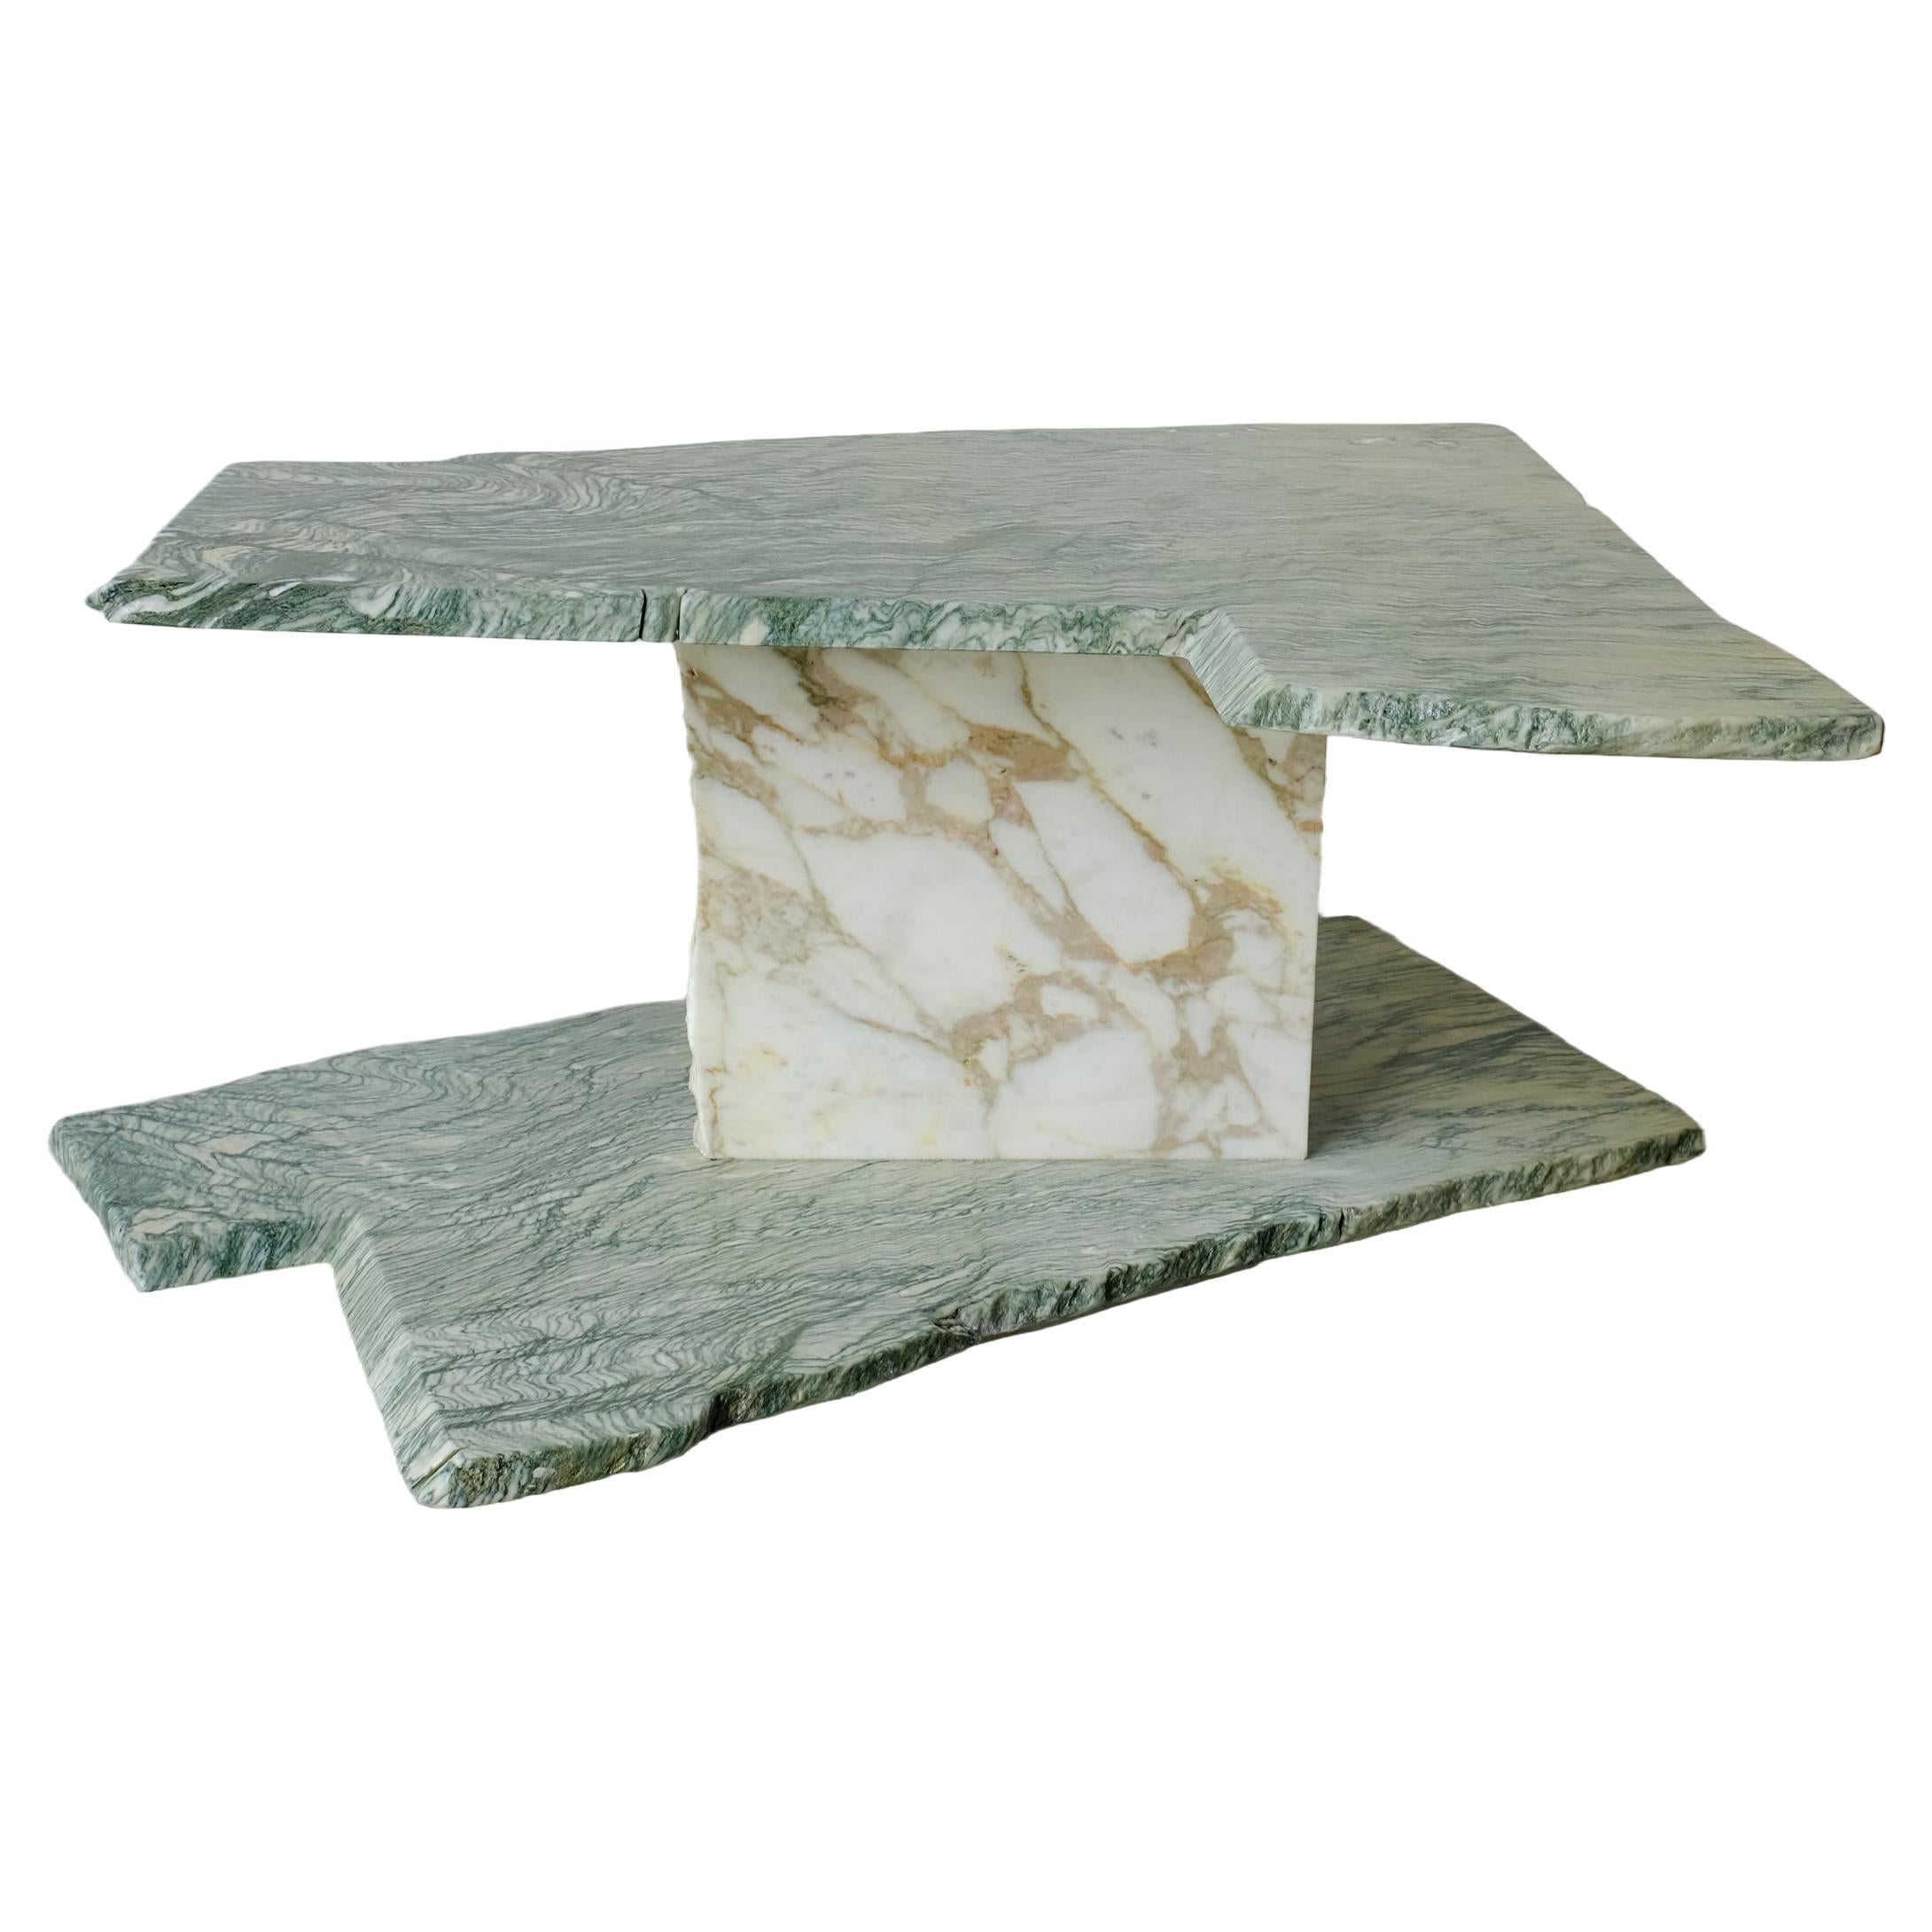 SST004 Coffee Table by Stone Stackers